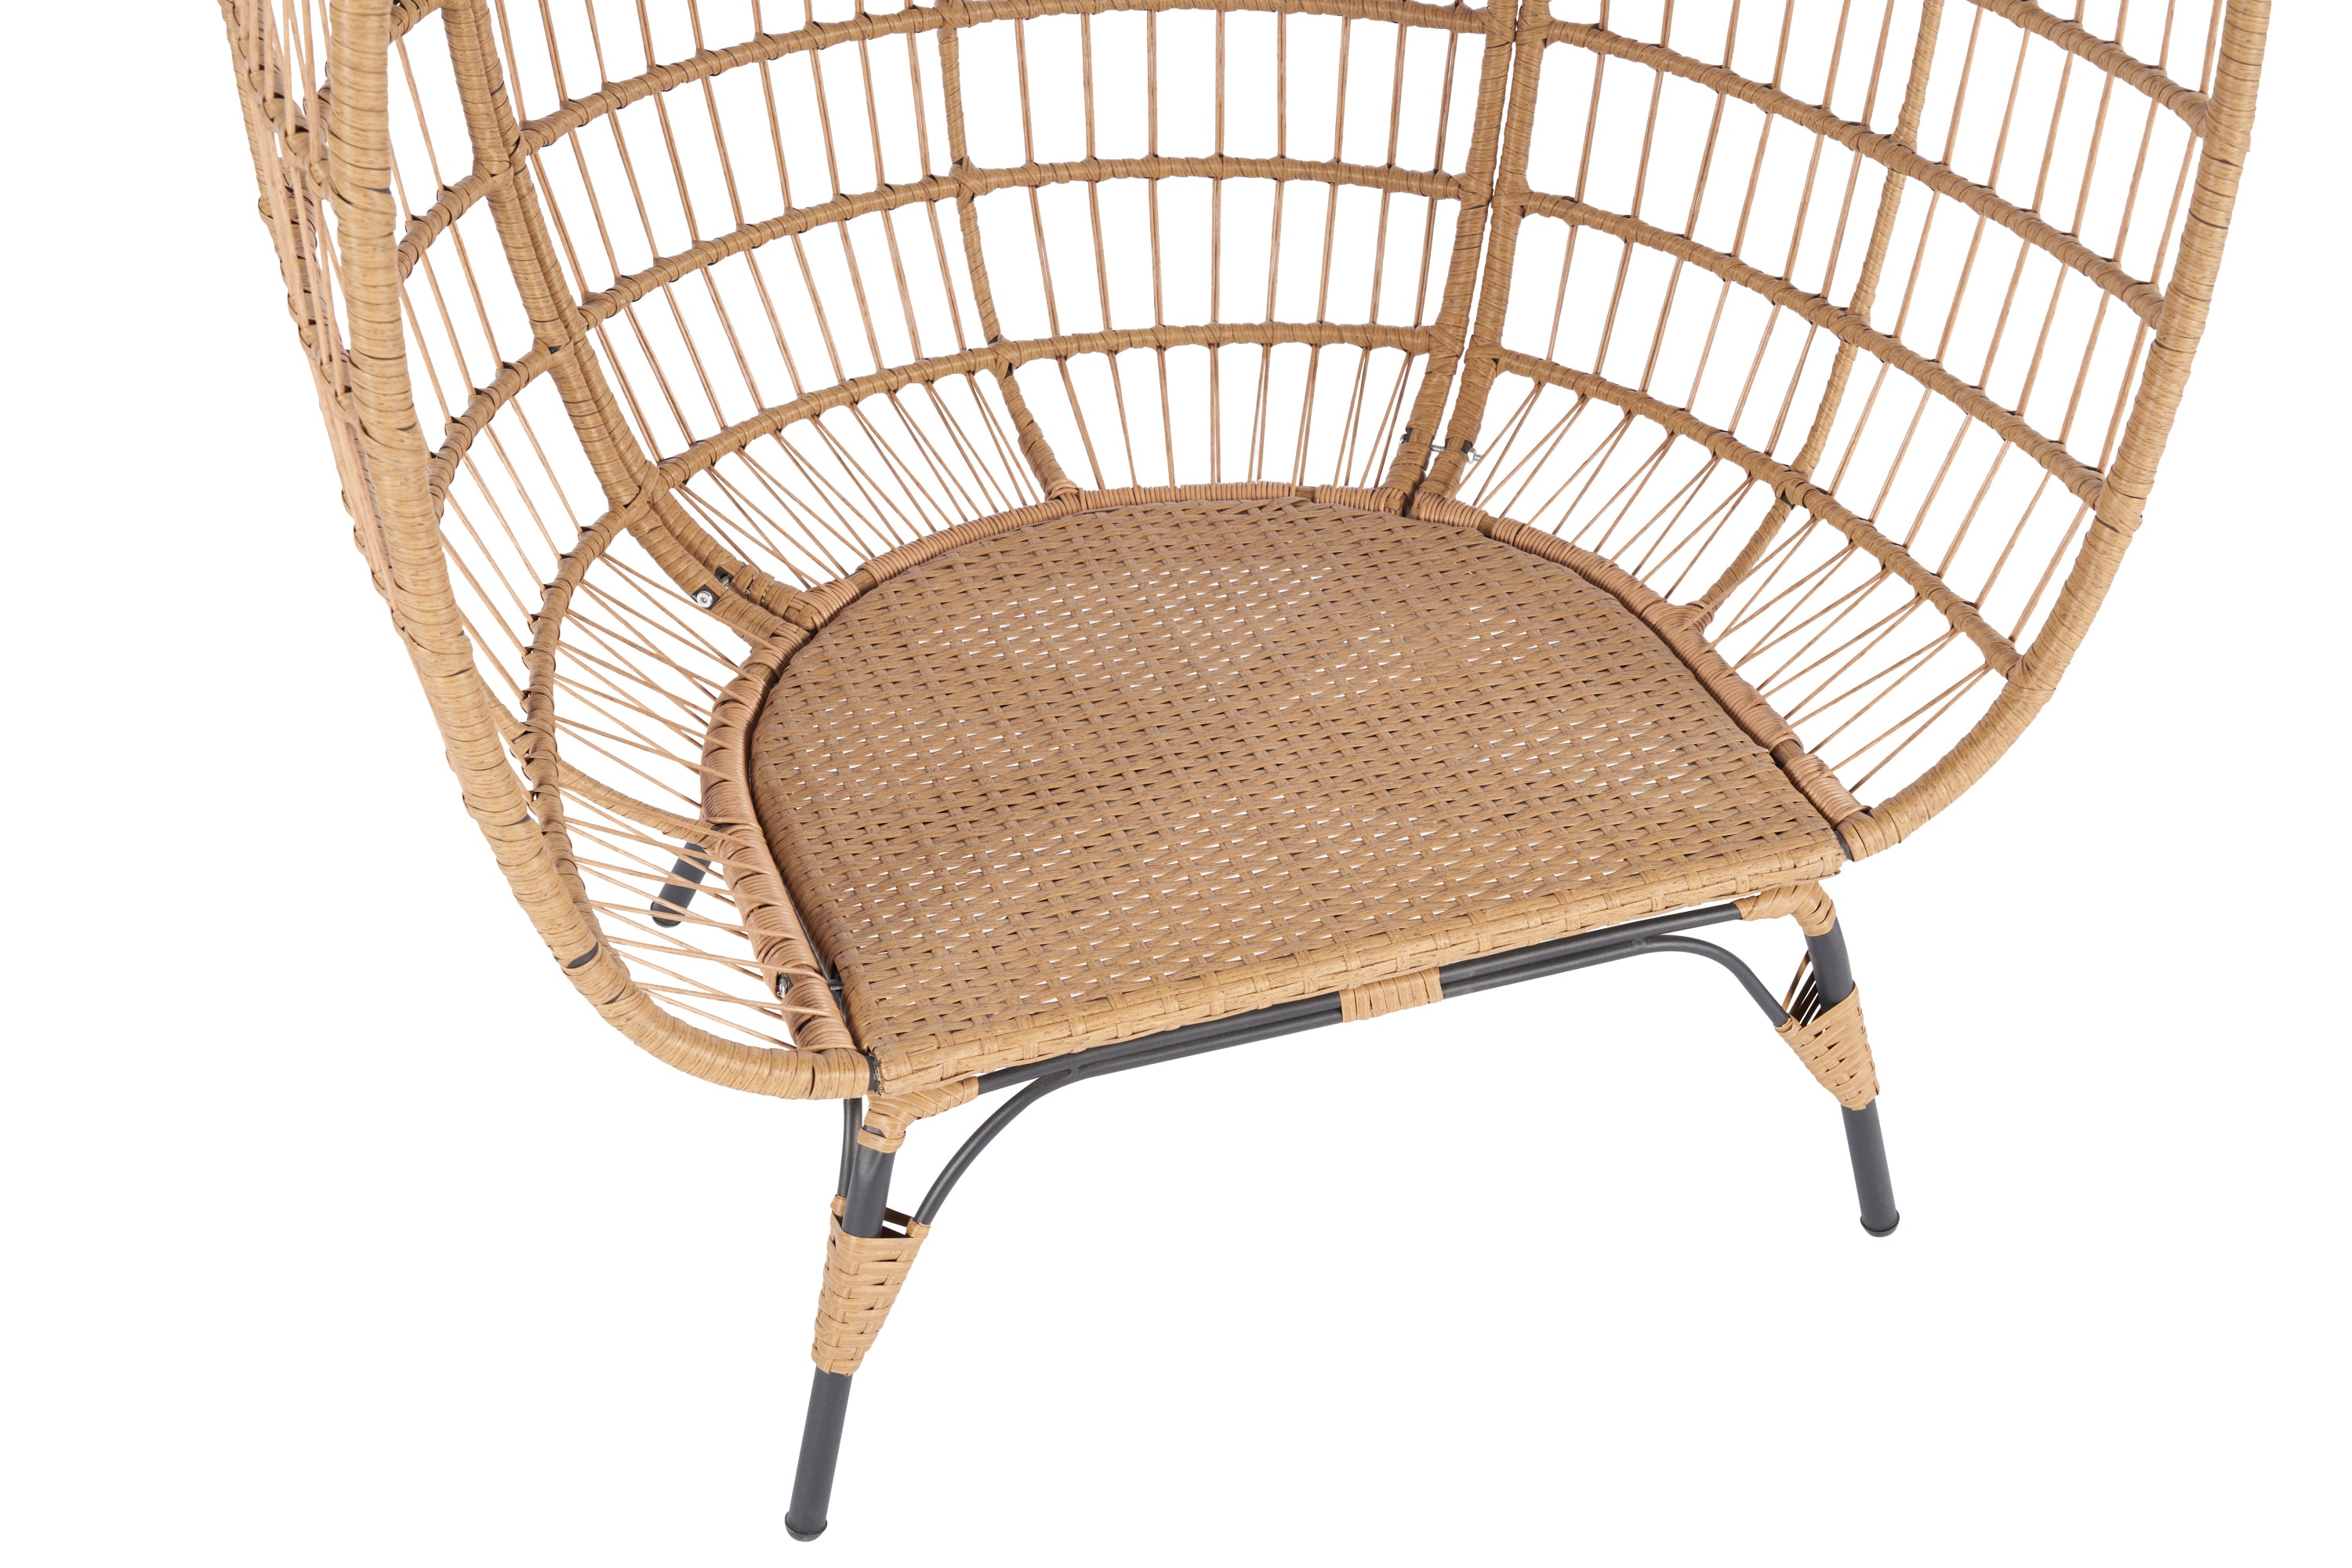 Wicker Egg Chair, Oversized Indoor Outdoor Lounger for Patio, Backyard, Living Room w/ 5 Cushions, Steel Frame,\